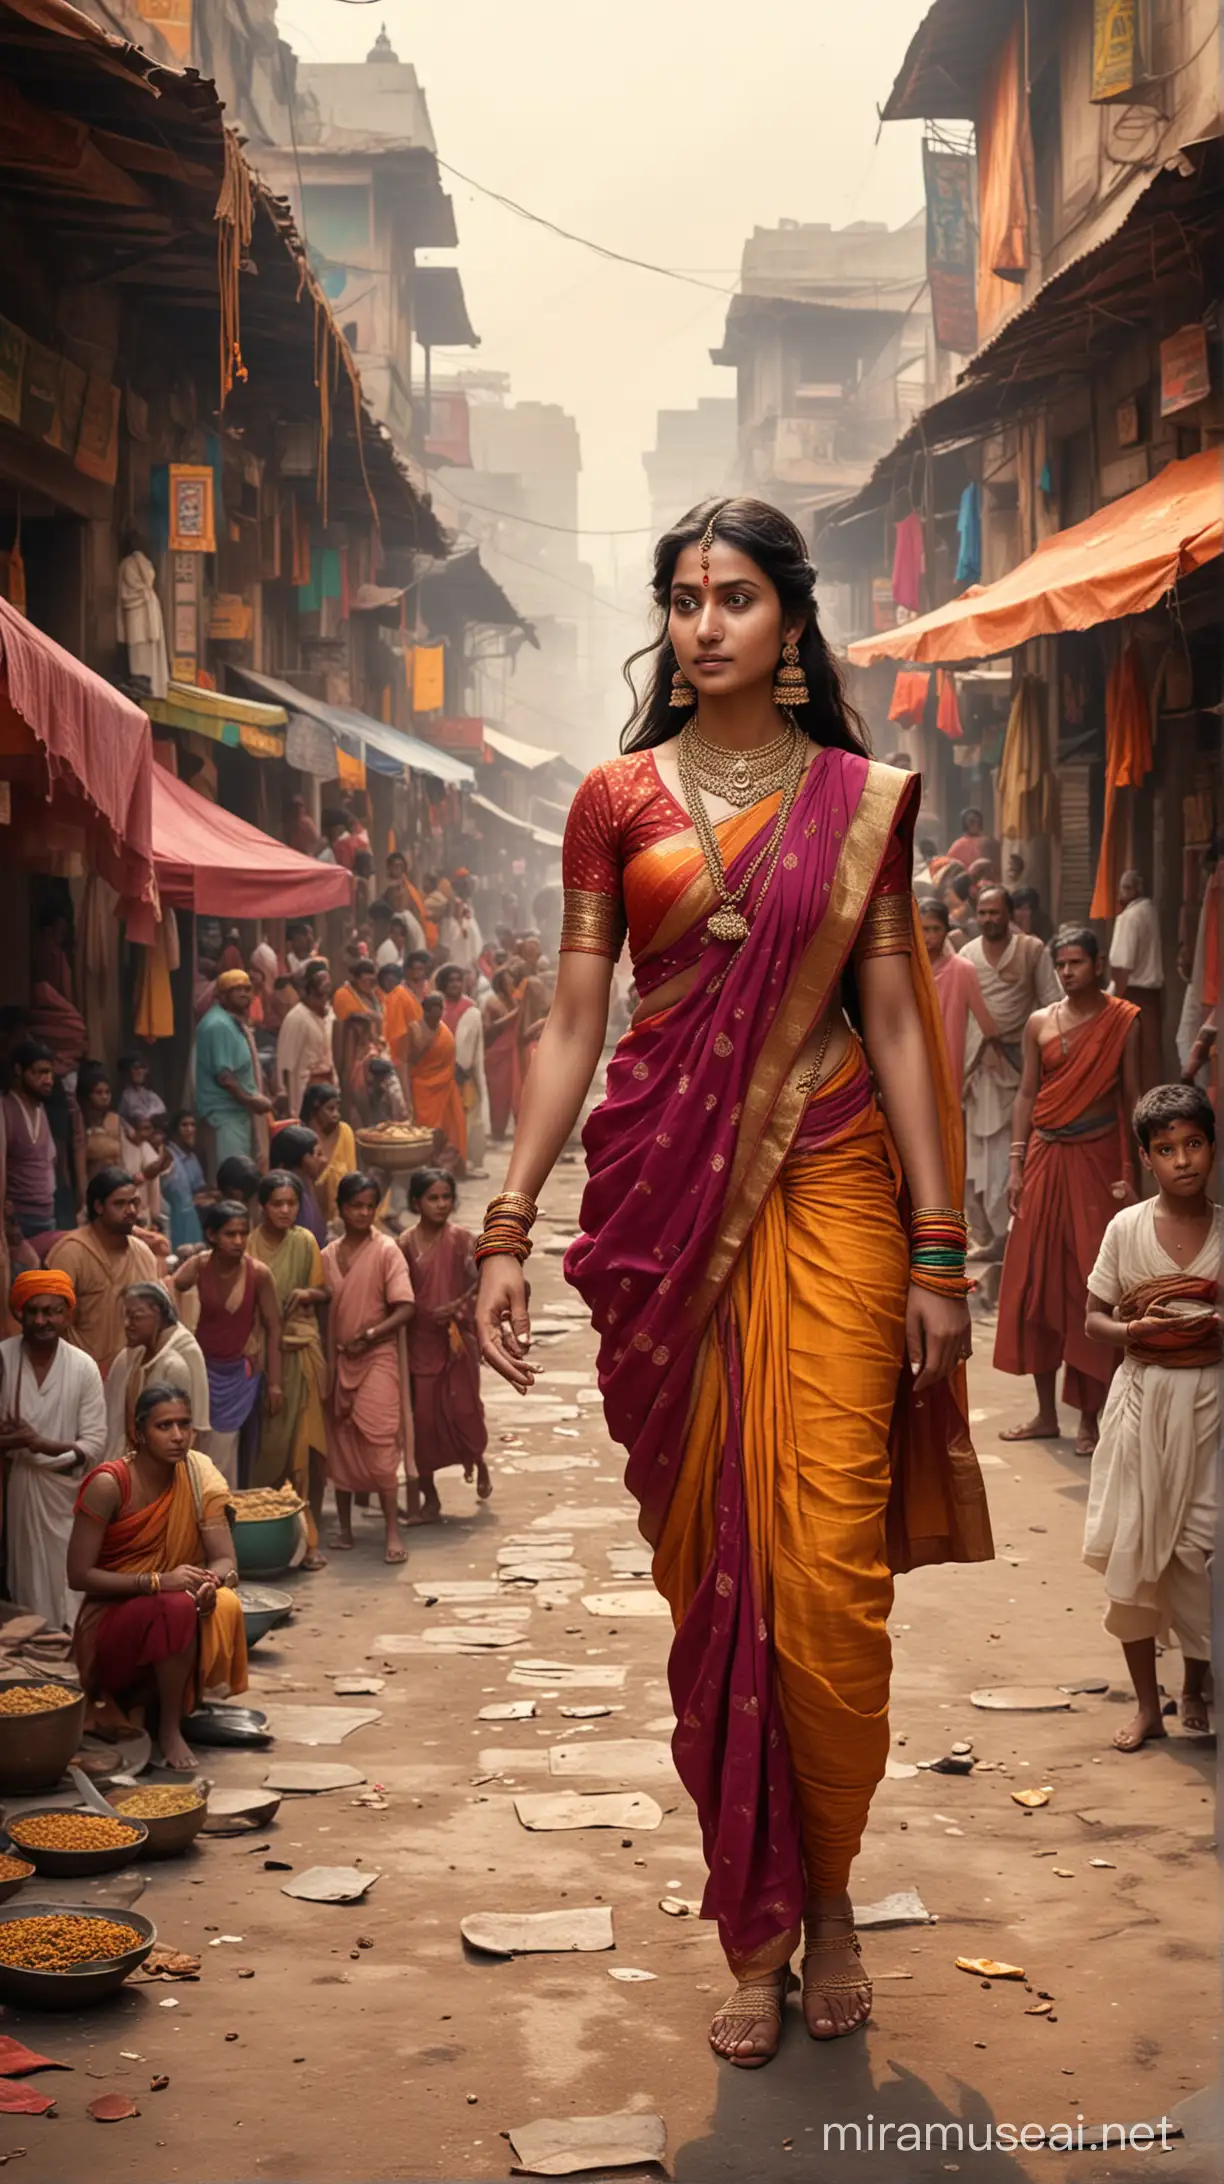 A vibrant depiction of ancient India, with colorful markets and bustling streets, setting the stage for the tale of Lakshmi Bai's courage and defiance. hyper realstic